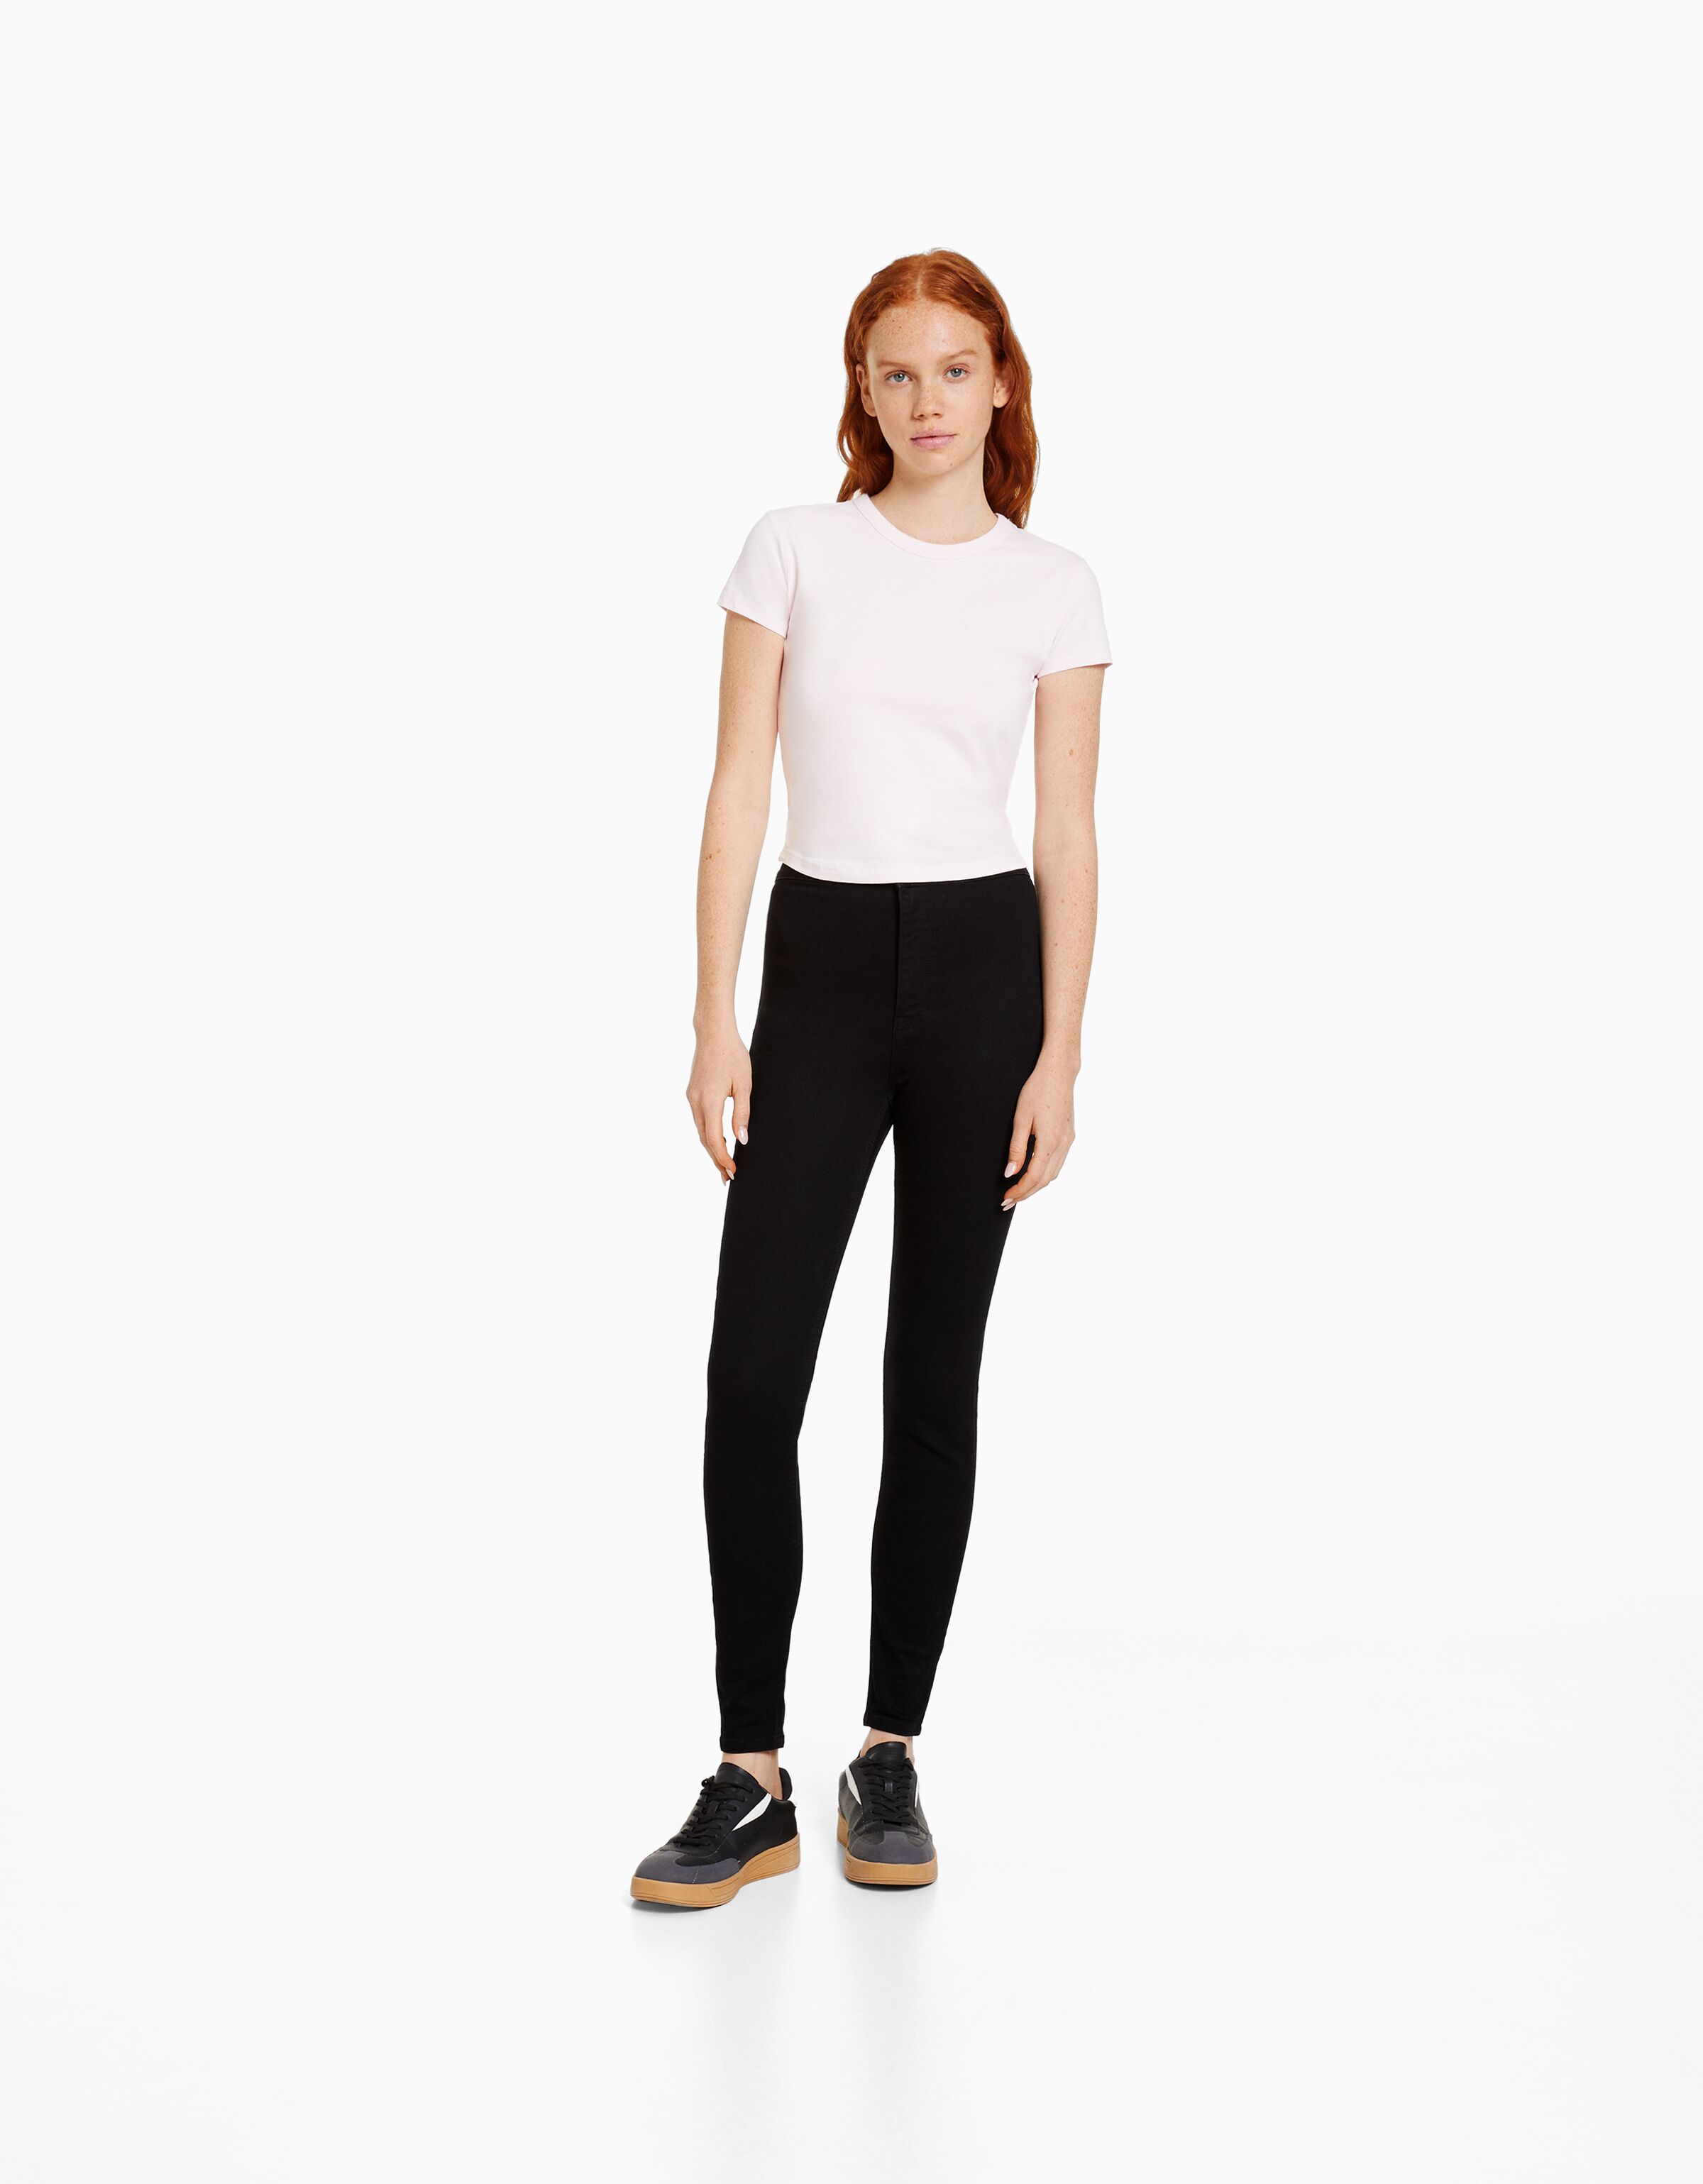 SHEIN Tall Waist-Wrapped Thermal Lining Leggings | SHEIN